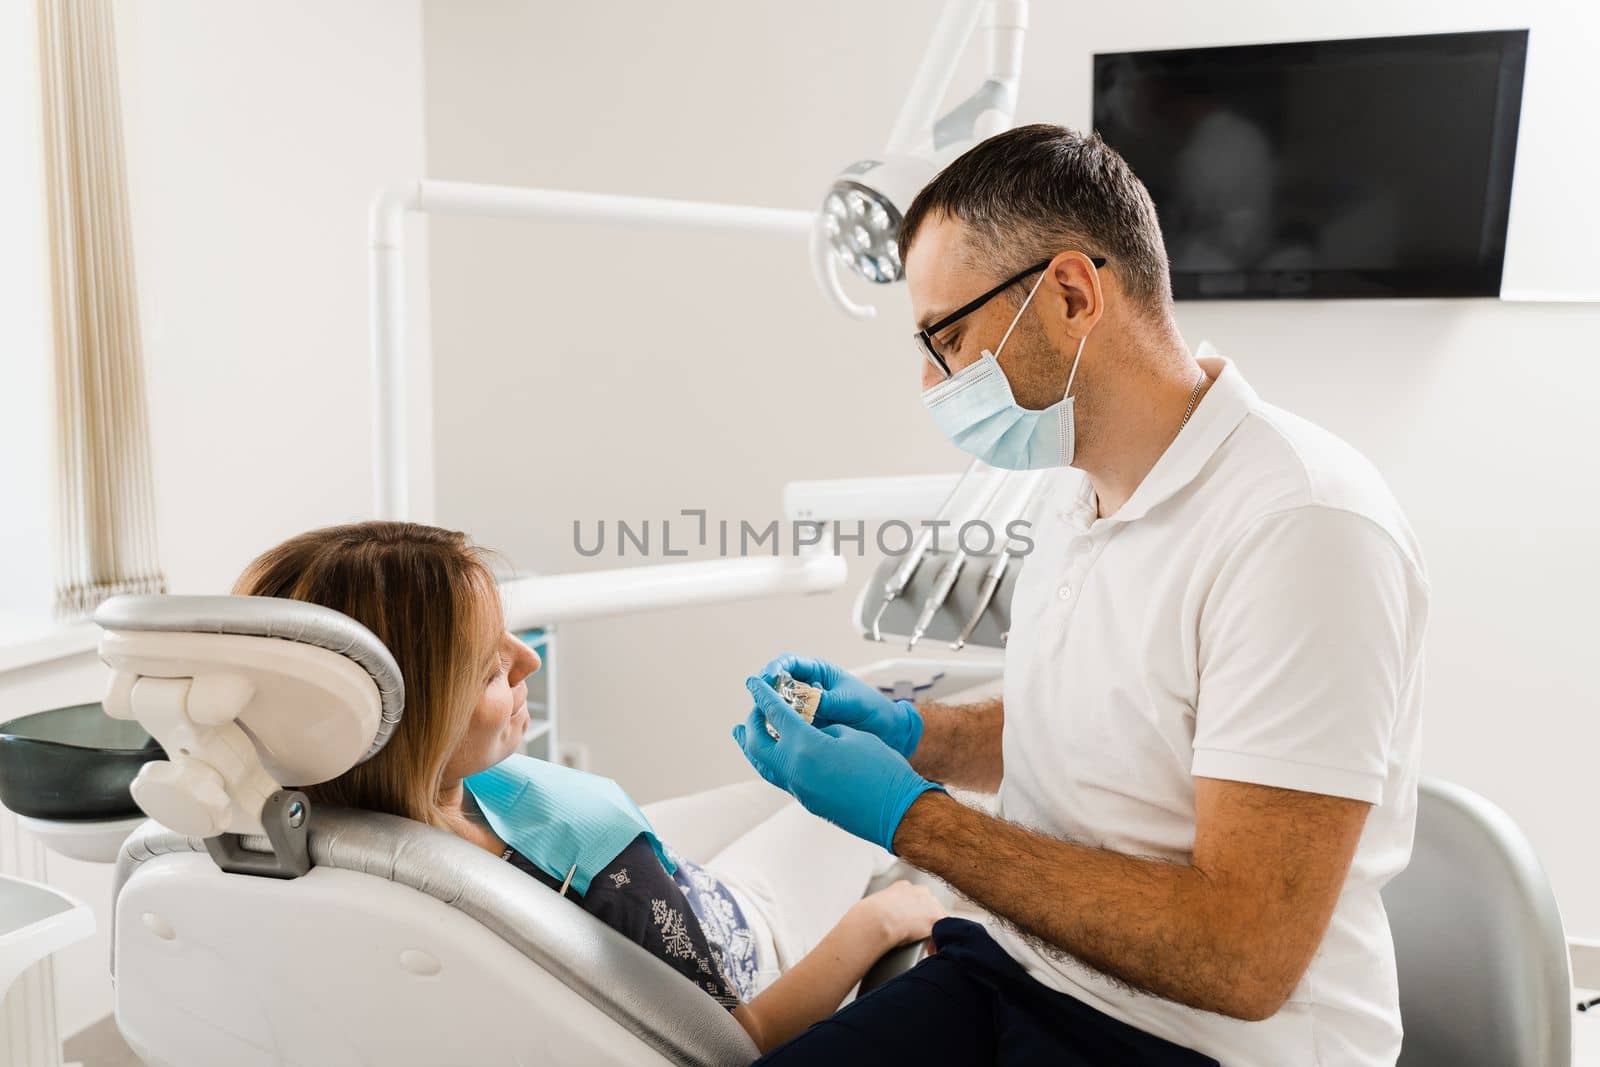 Dental prosthetics and implants. Doctor dentist shows artificial plastic jaw with dental implants. Dental prosthetics consultation with dentist for patient woman in dentistry